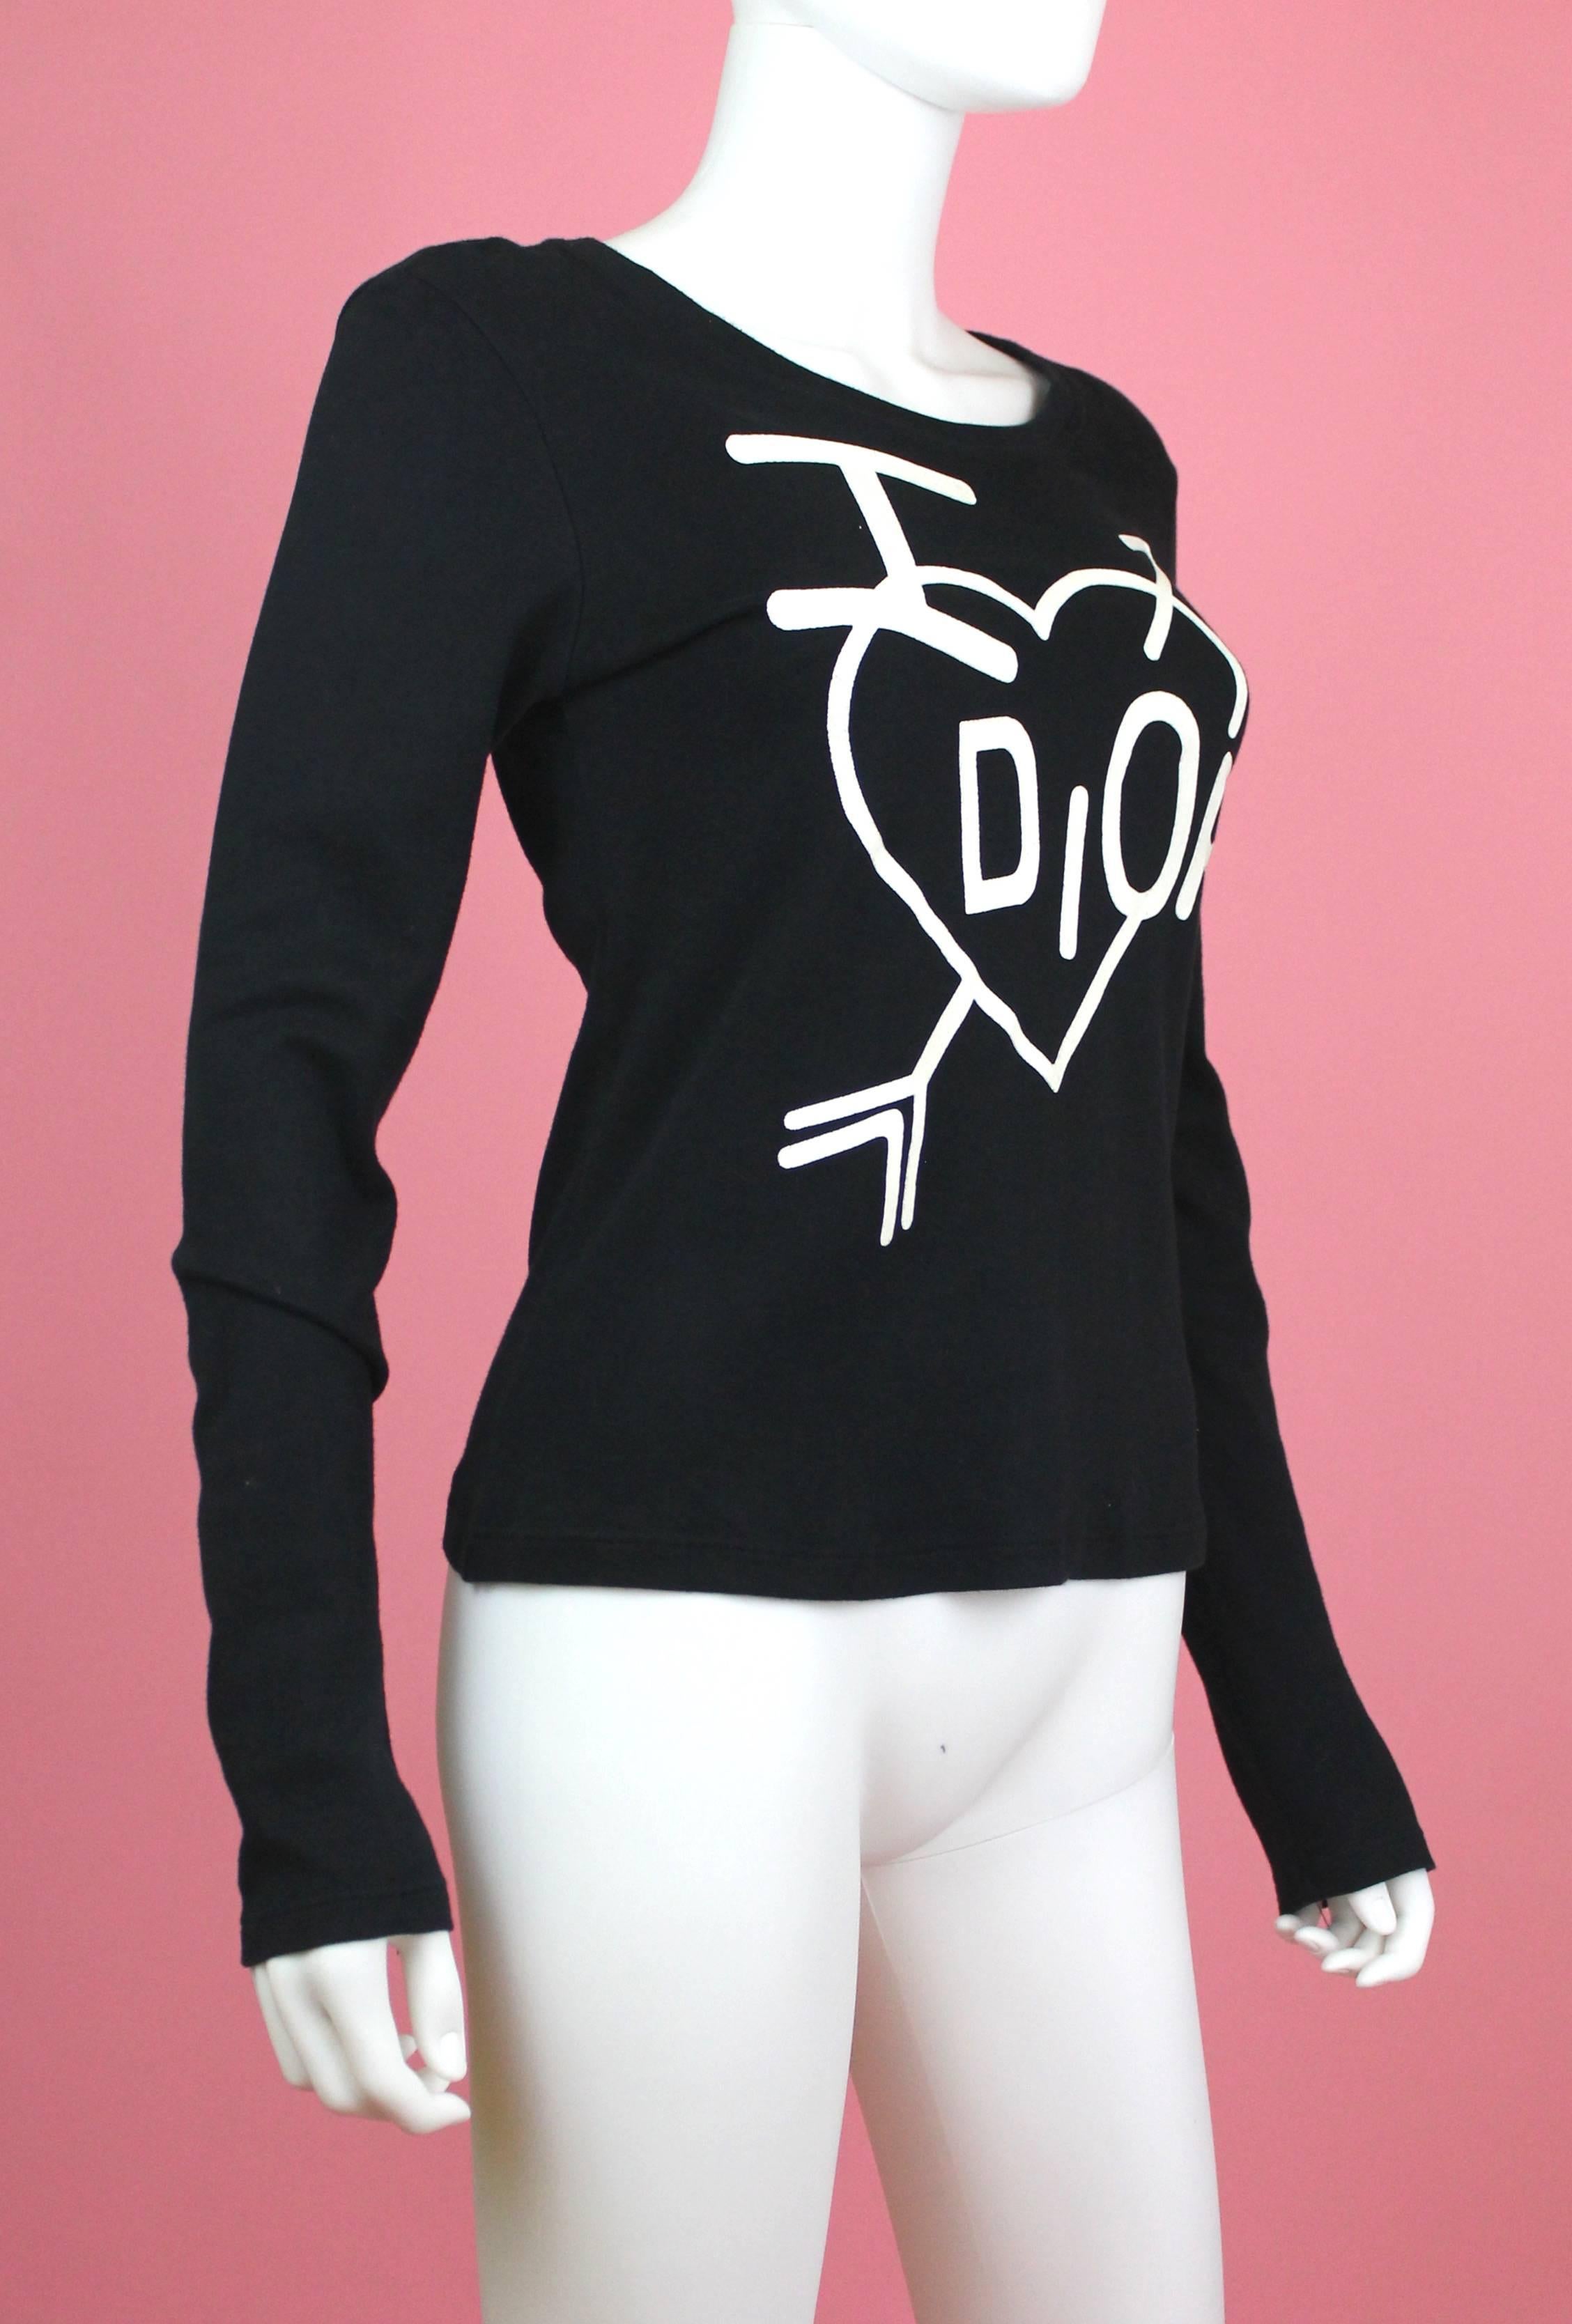 Christian Dior  Cupid Logo Long Sleeve Black T-Shirt, c. 2000's, Size 8 US In Excellent Condition In Los Angeles, CA